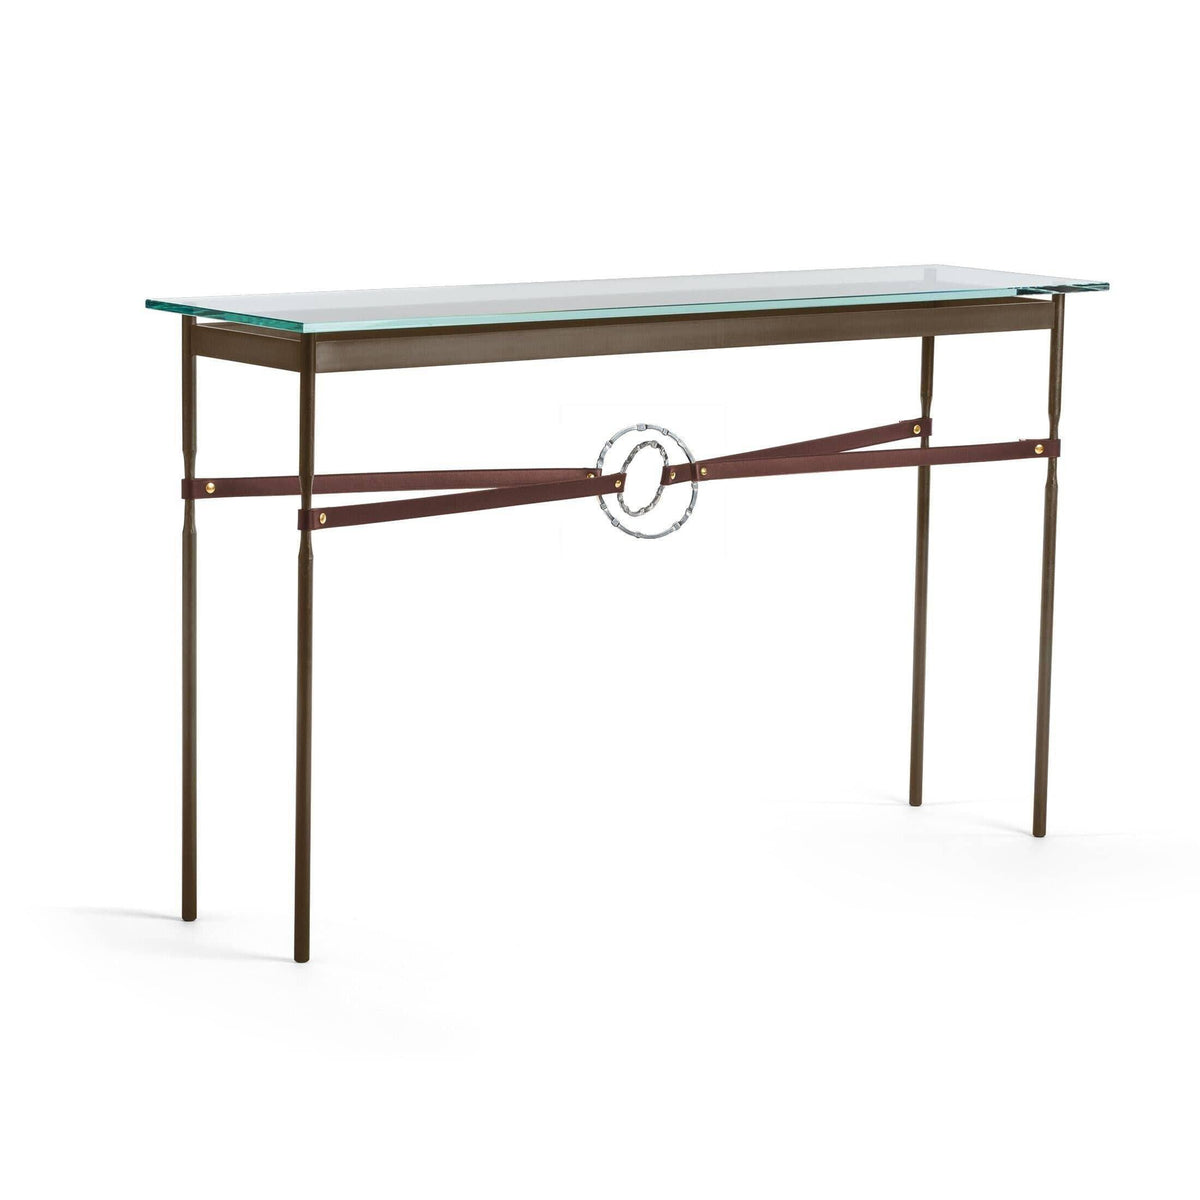 Hubbardton Forge - Equus Brown Leather Console Table - 750118-05-85-LB-VA0714 | Montreal Lighting & Hardware